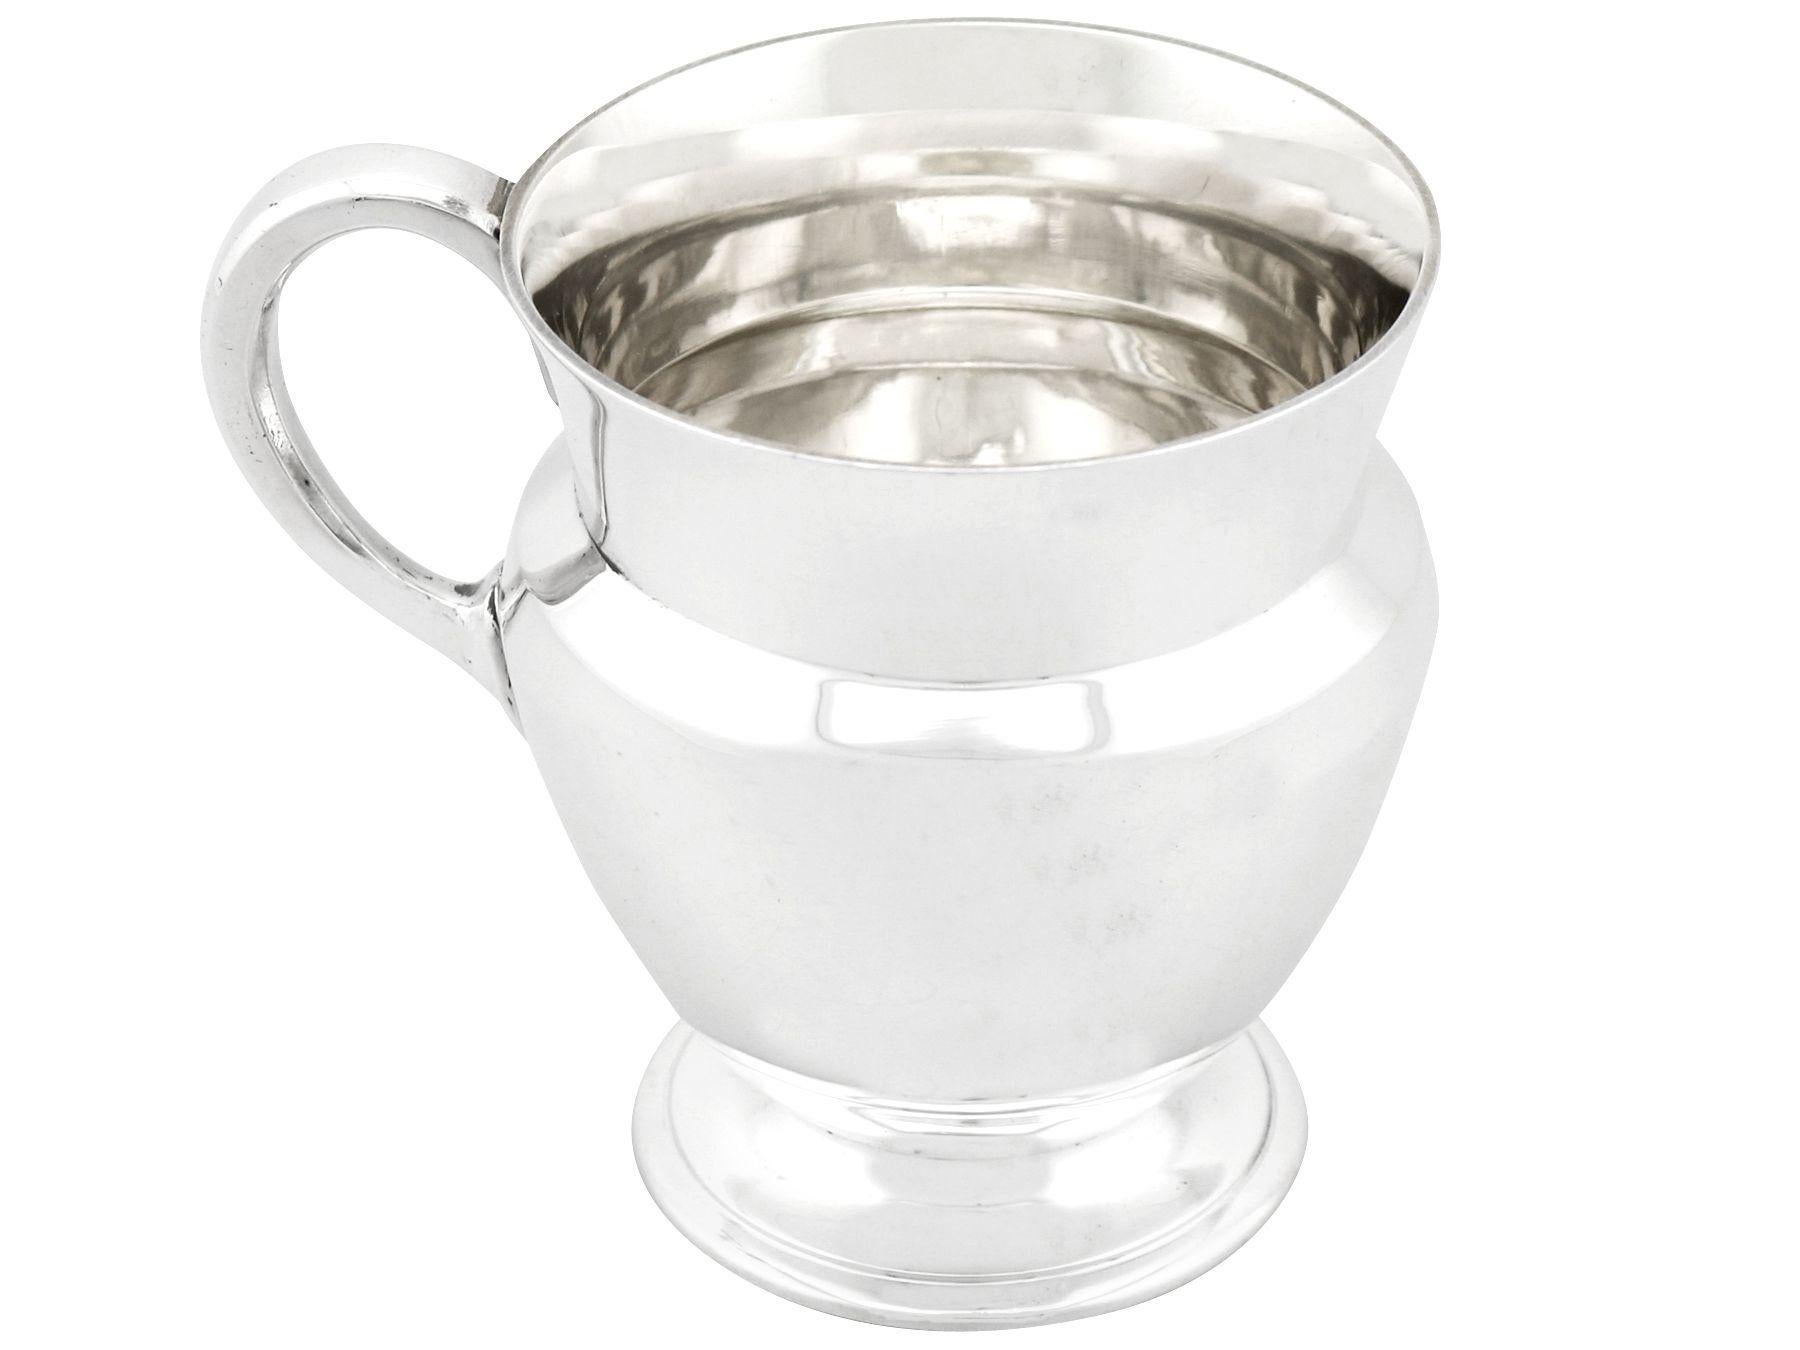 An exceptional, fine and impressive antique George VI English sterling silver christening mug in the Art Deco style; an addition to our Art Deco silverware collection.

This exceptional antique George VI sterling silver christening mug has a plain